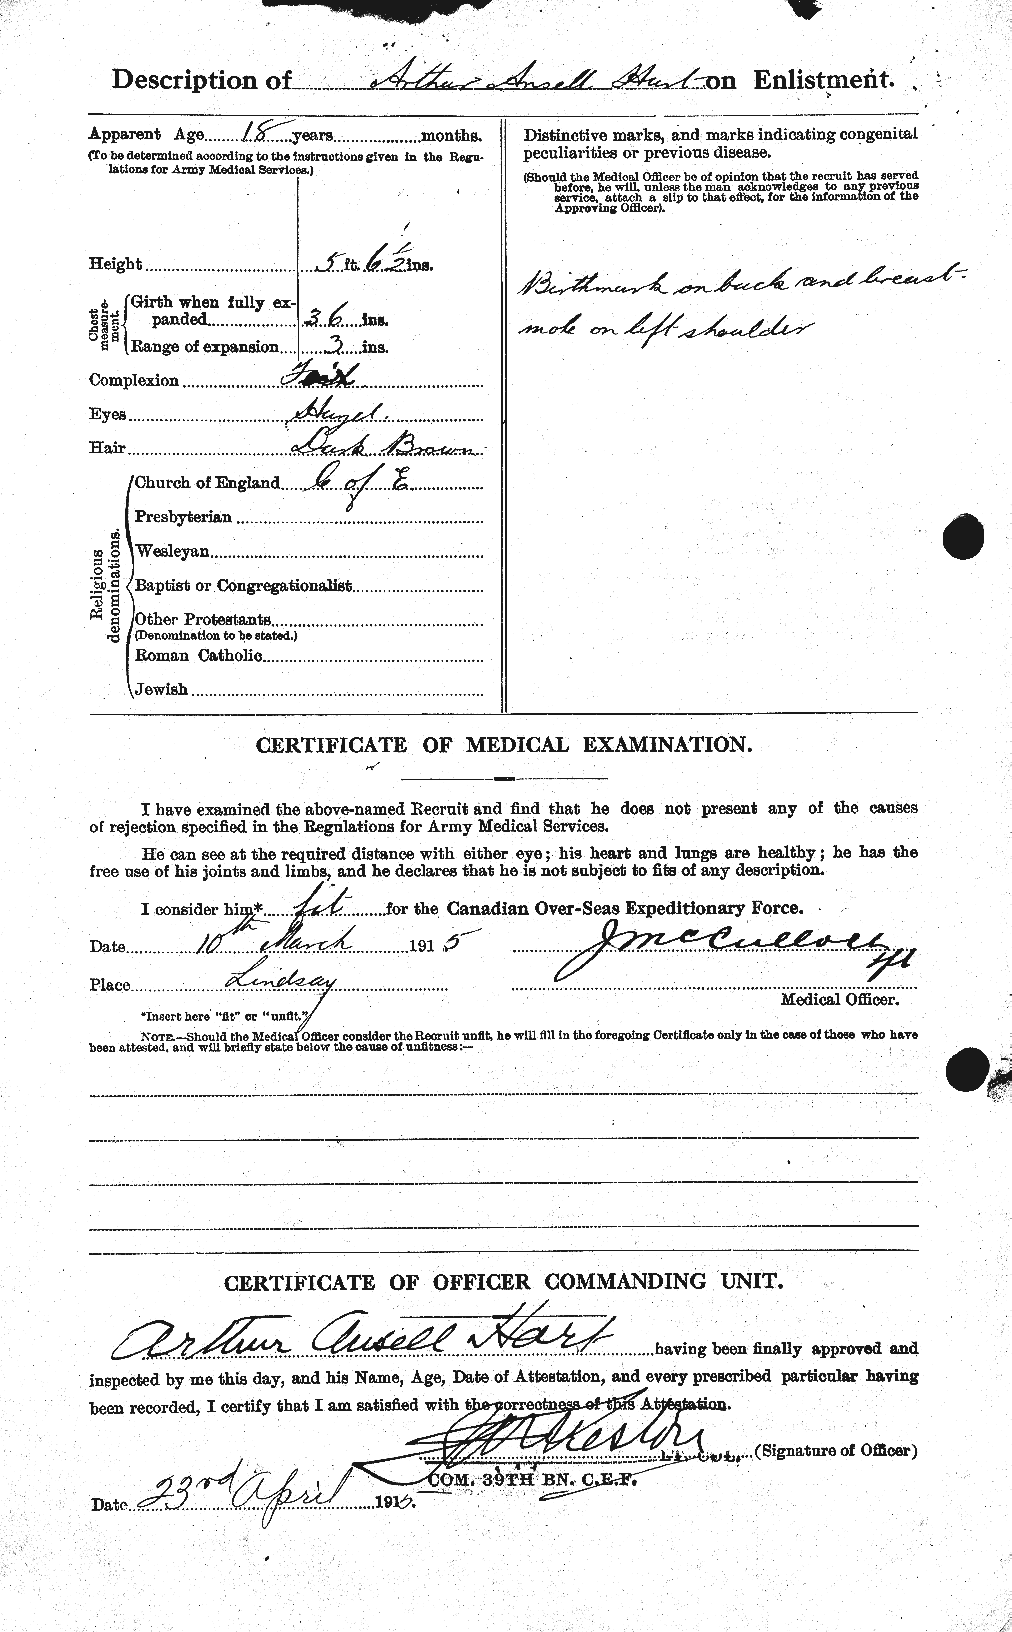 Personnel Records of the First World War - CEF 381818b